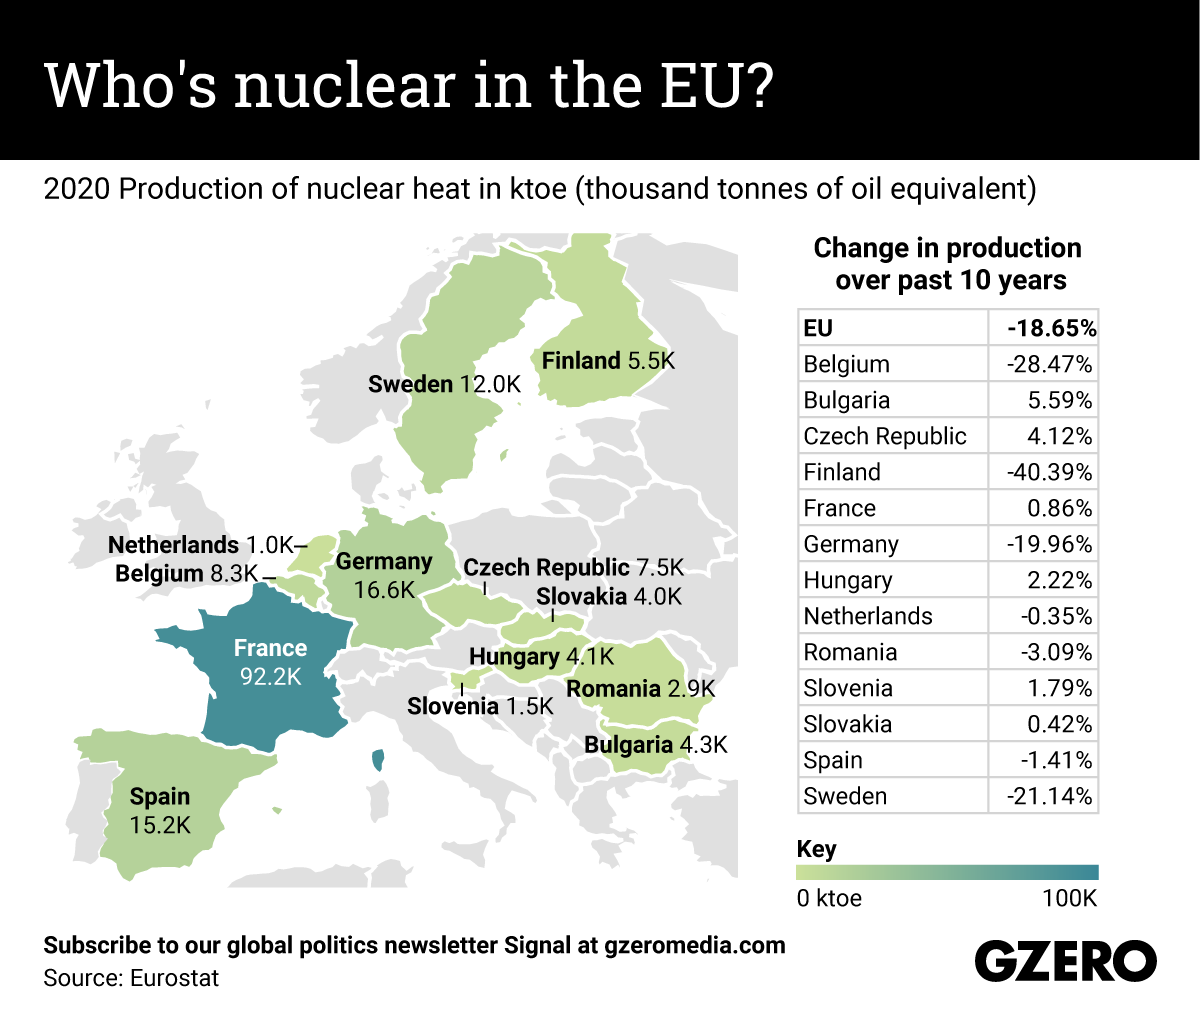 The Graphic Truth: Who's nuclear in the EU?